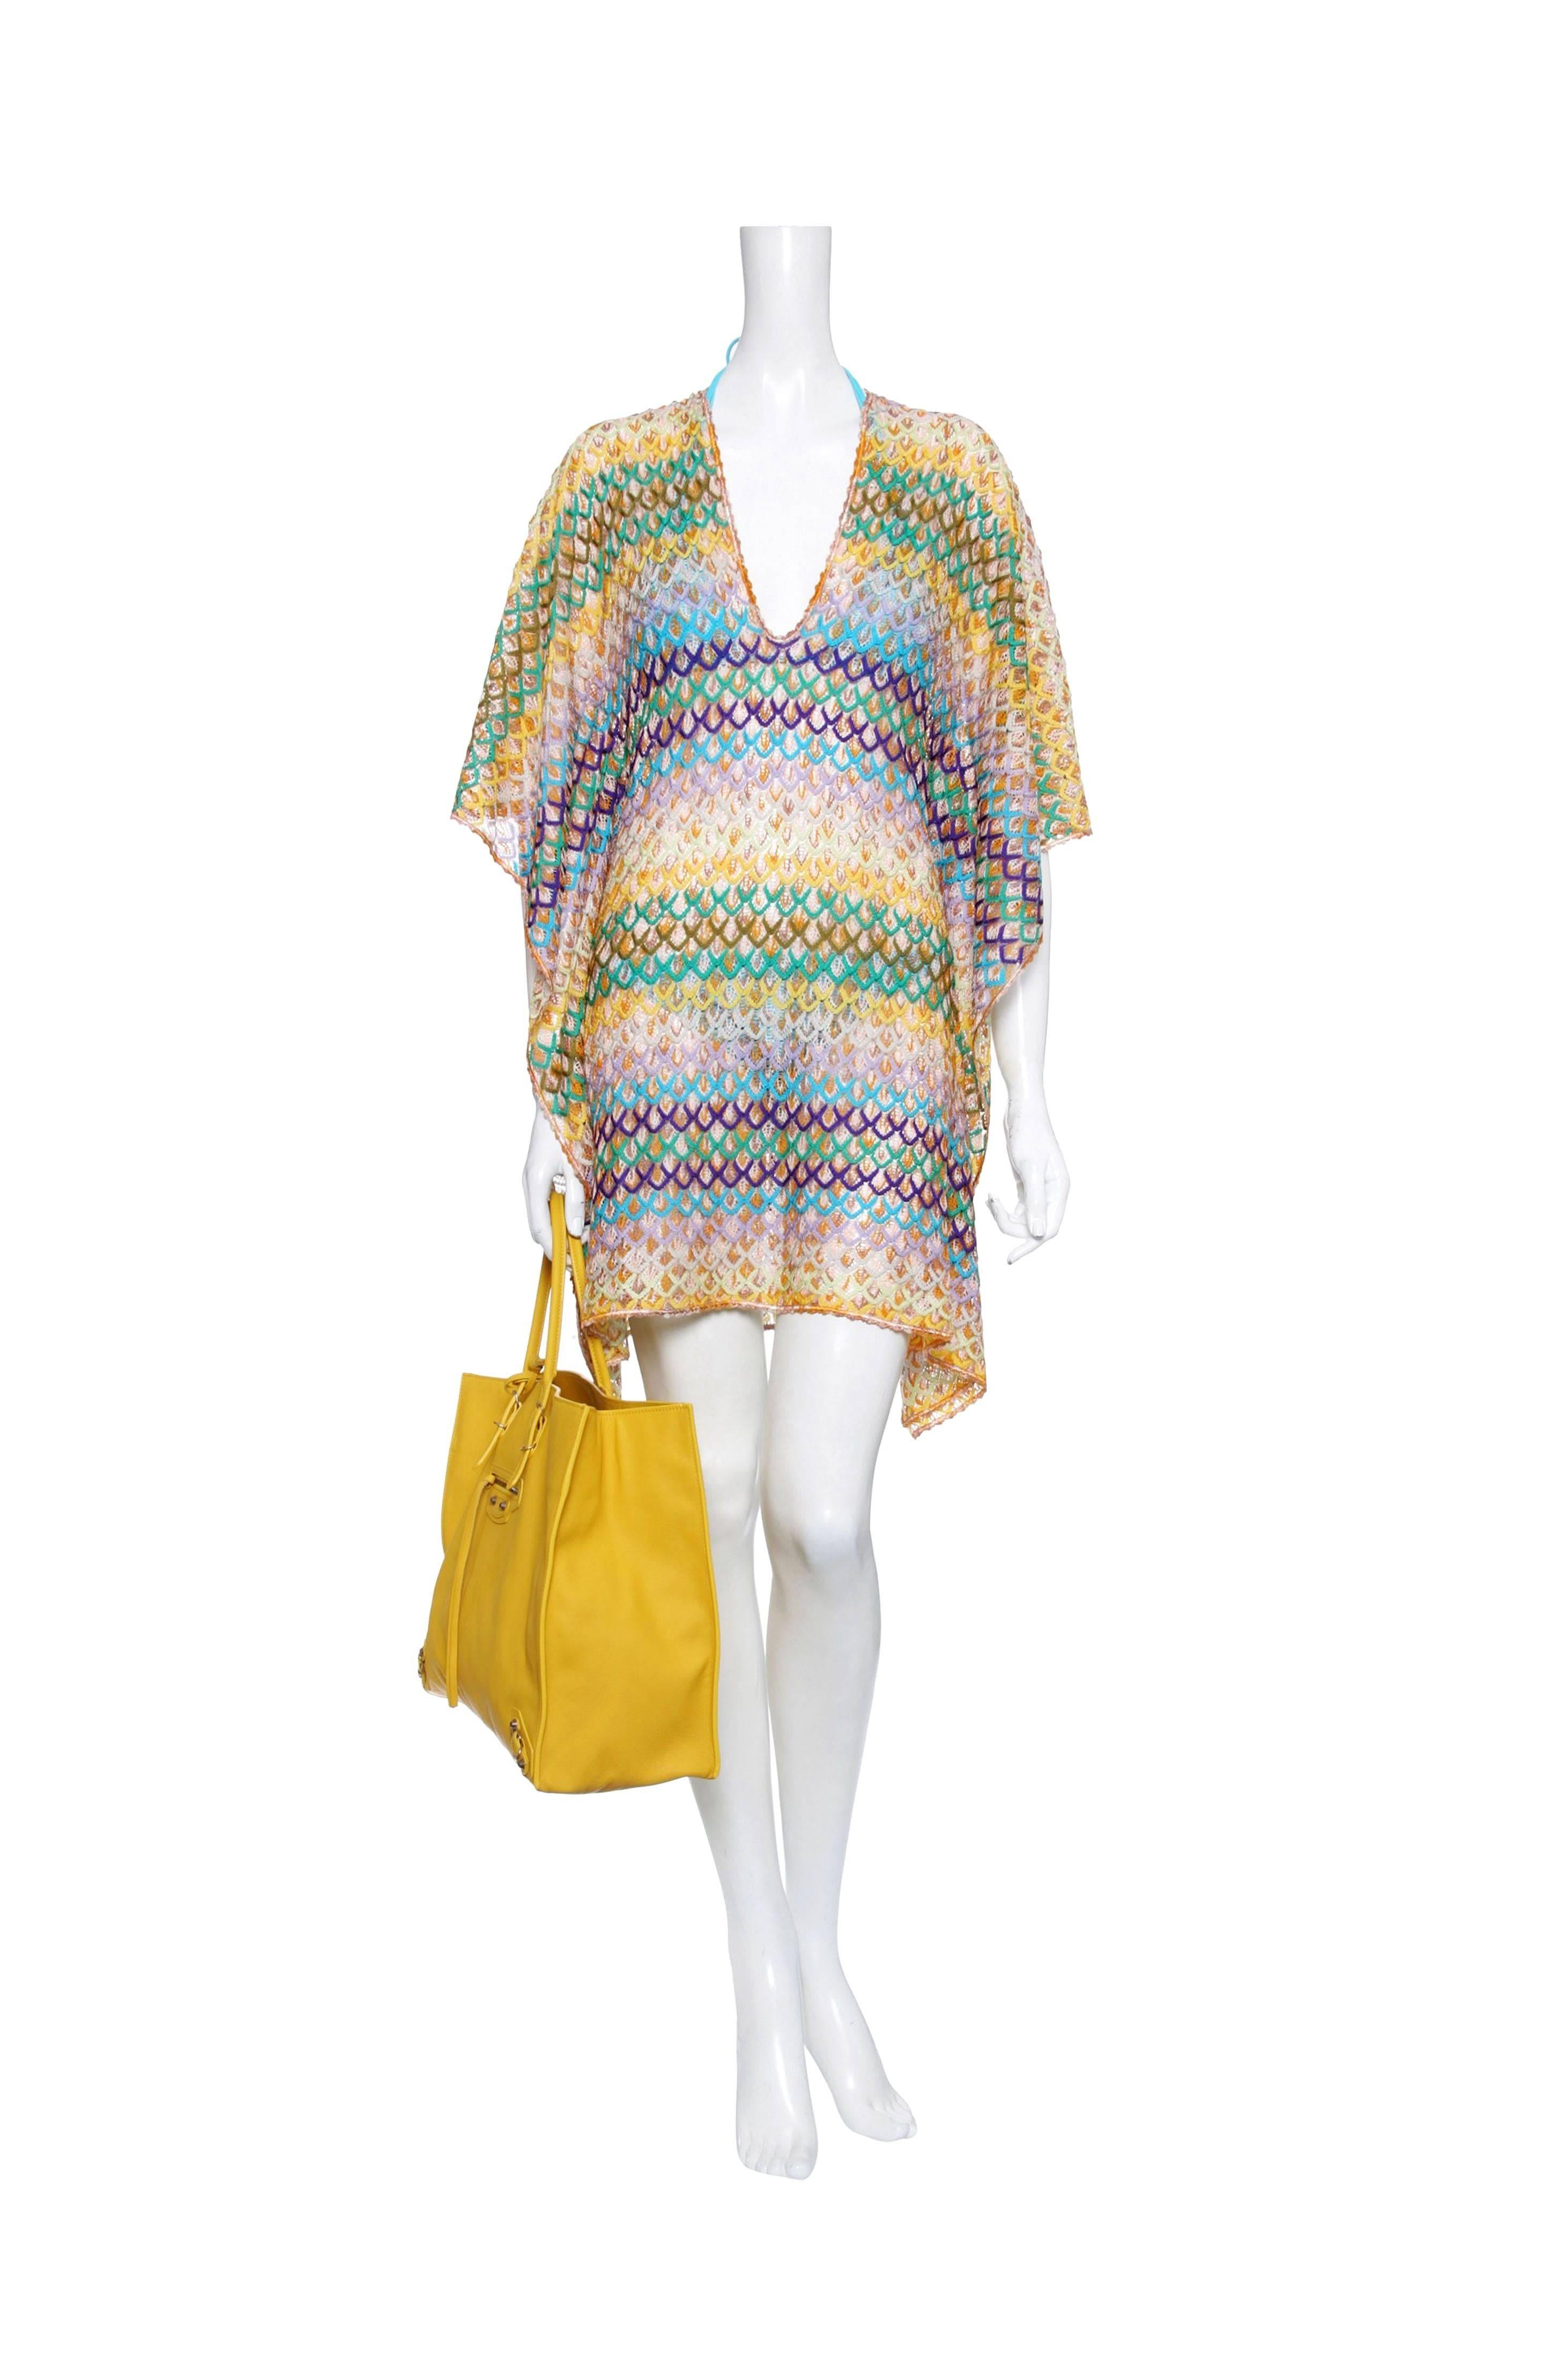 A signature Missoni Mare knit caftan in a rainbow of colors is the only coverup you'll need this Resort season

Multicolored knitted kaftan with wave pattern
Fish scale knit
Plunging V-neckline.
Short kimono sleeves
Simply slips on
Made in